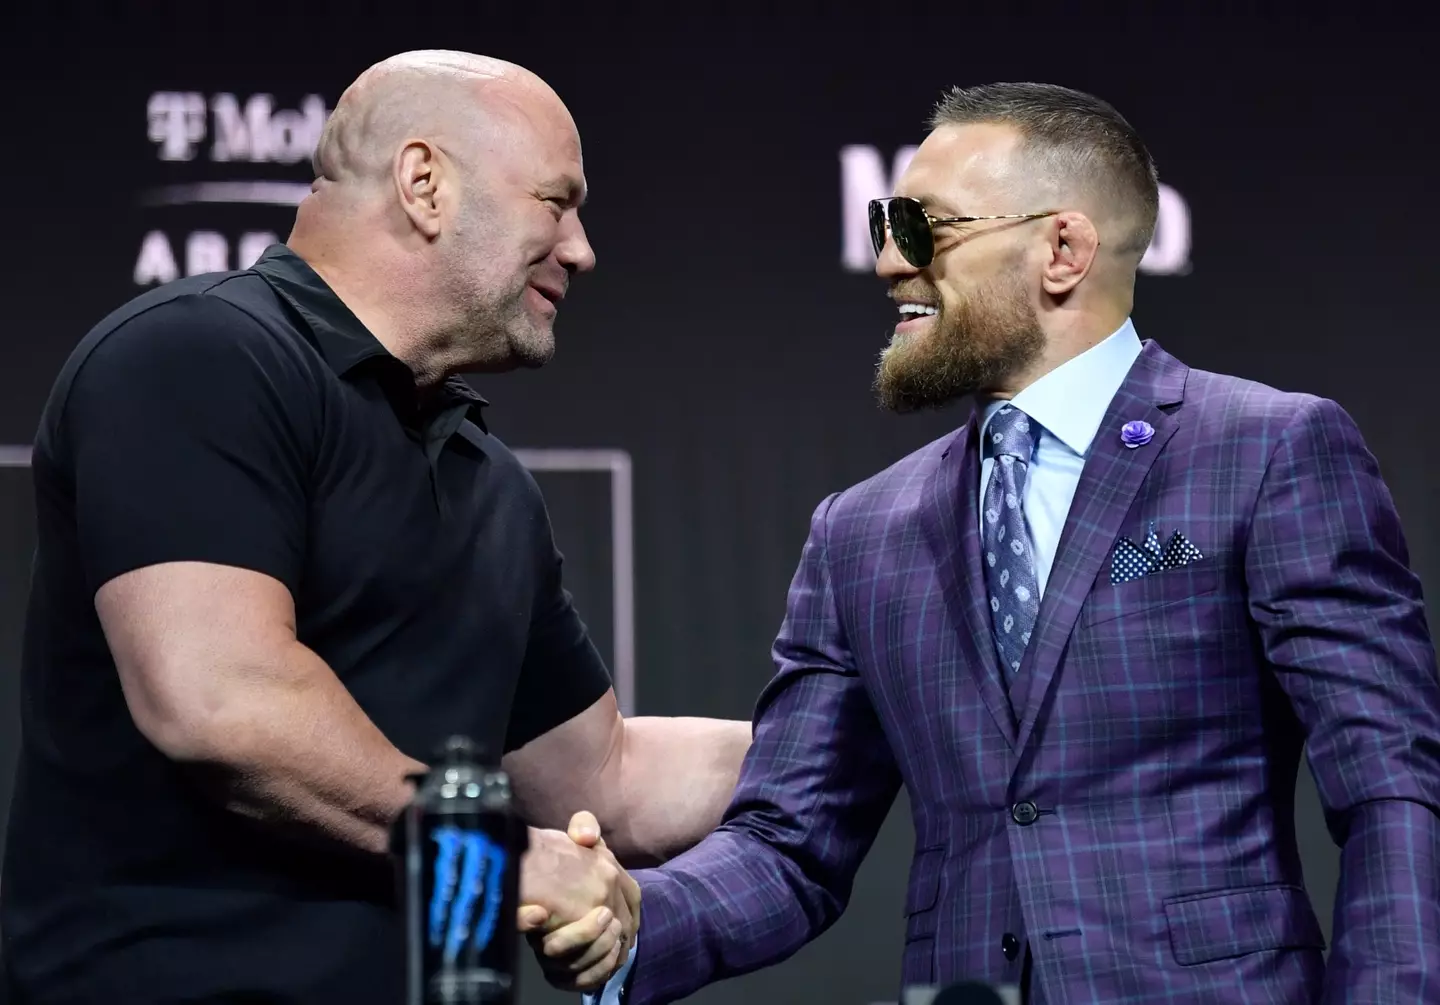 Dana White and Conor McGregor at a UFC press conference. Image: Getty